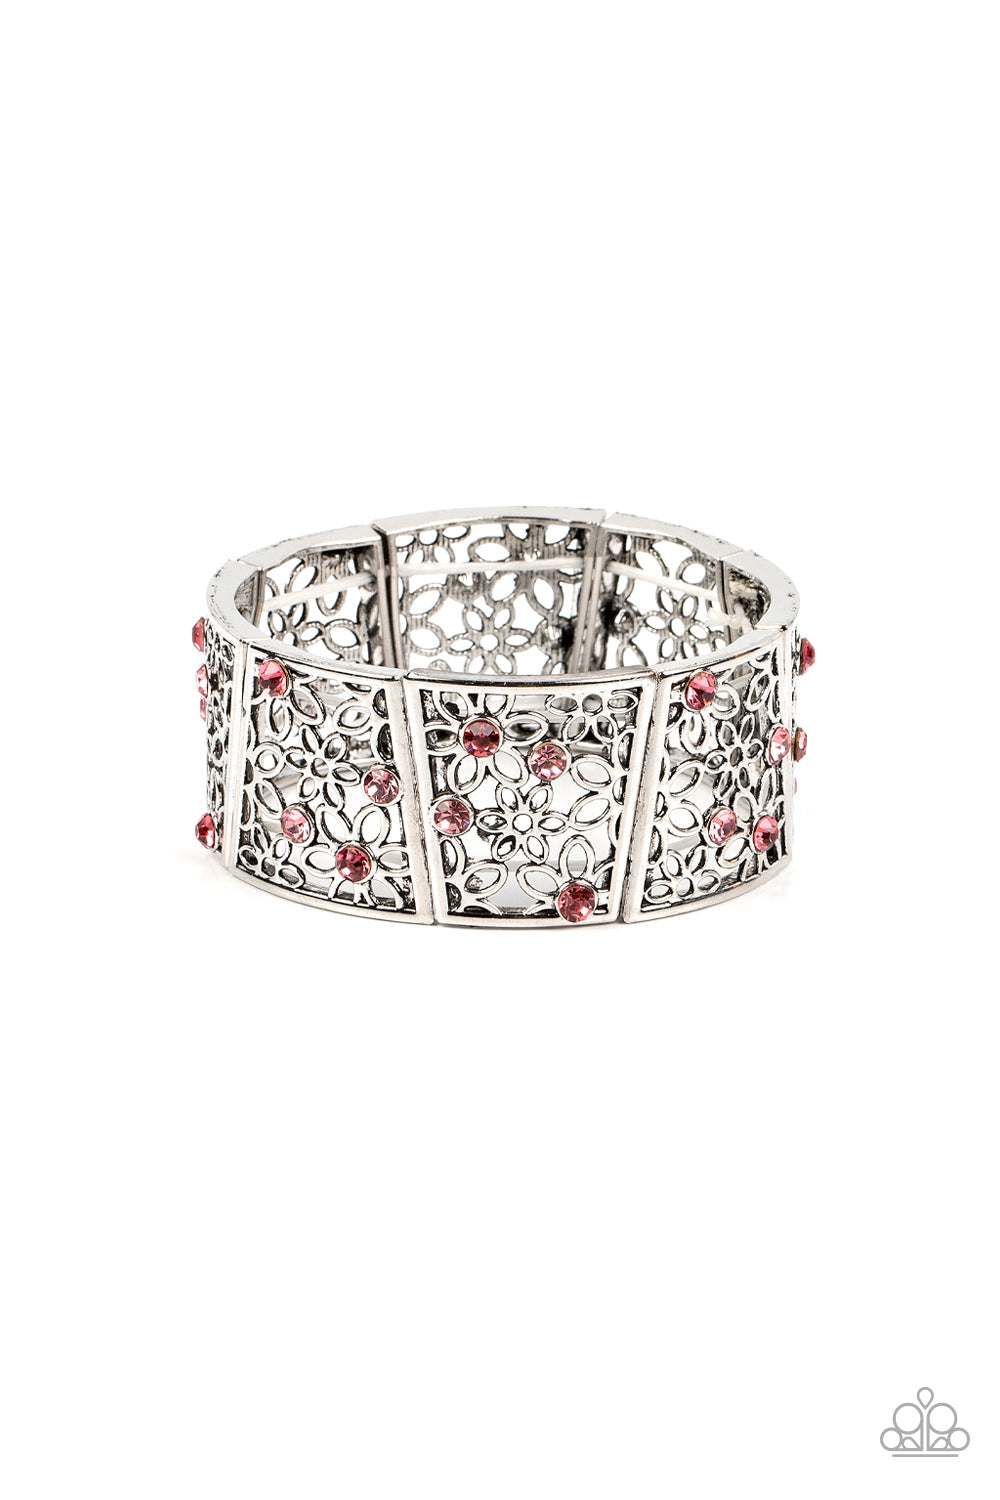 Spring Greetings - Pink Floral Daisy Bracelet - Paparazzi Accessories - Sporadically dotted with pink and Gossamer Pink, an airy daisy pattern blooms inside trapezoidal silver frames that are threaded along stretchy bands around the wrist for a seasonal statement. Sold as one individual bracelet. 